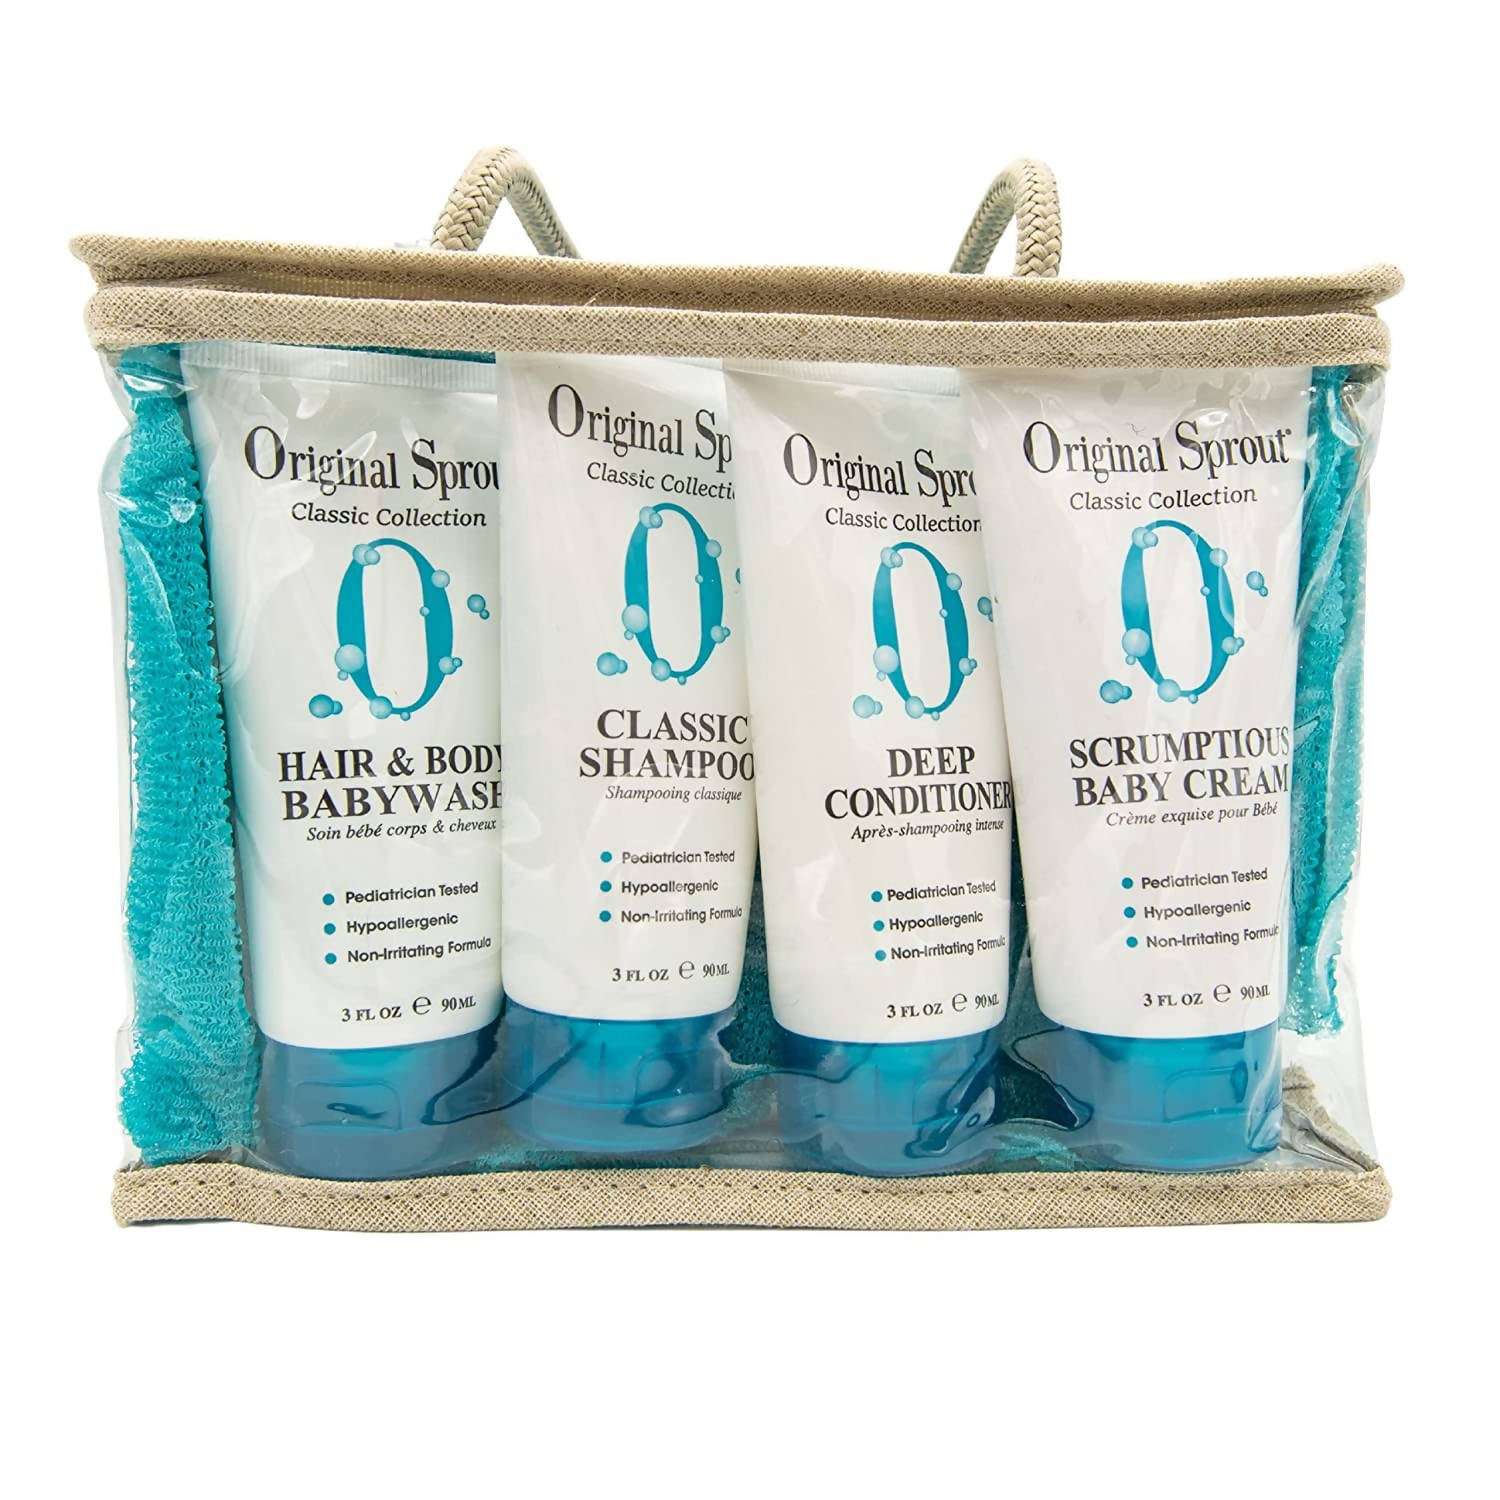 Original Sprout Classic Collection Deluxe Travel Kit Shampoo Travel Sets